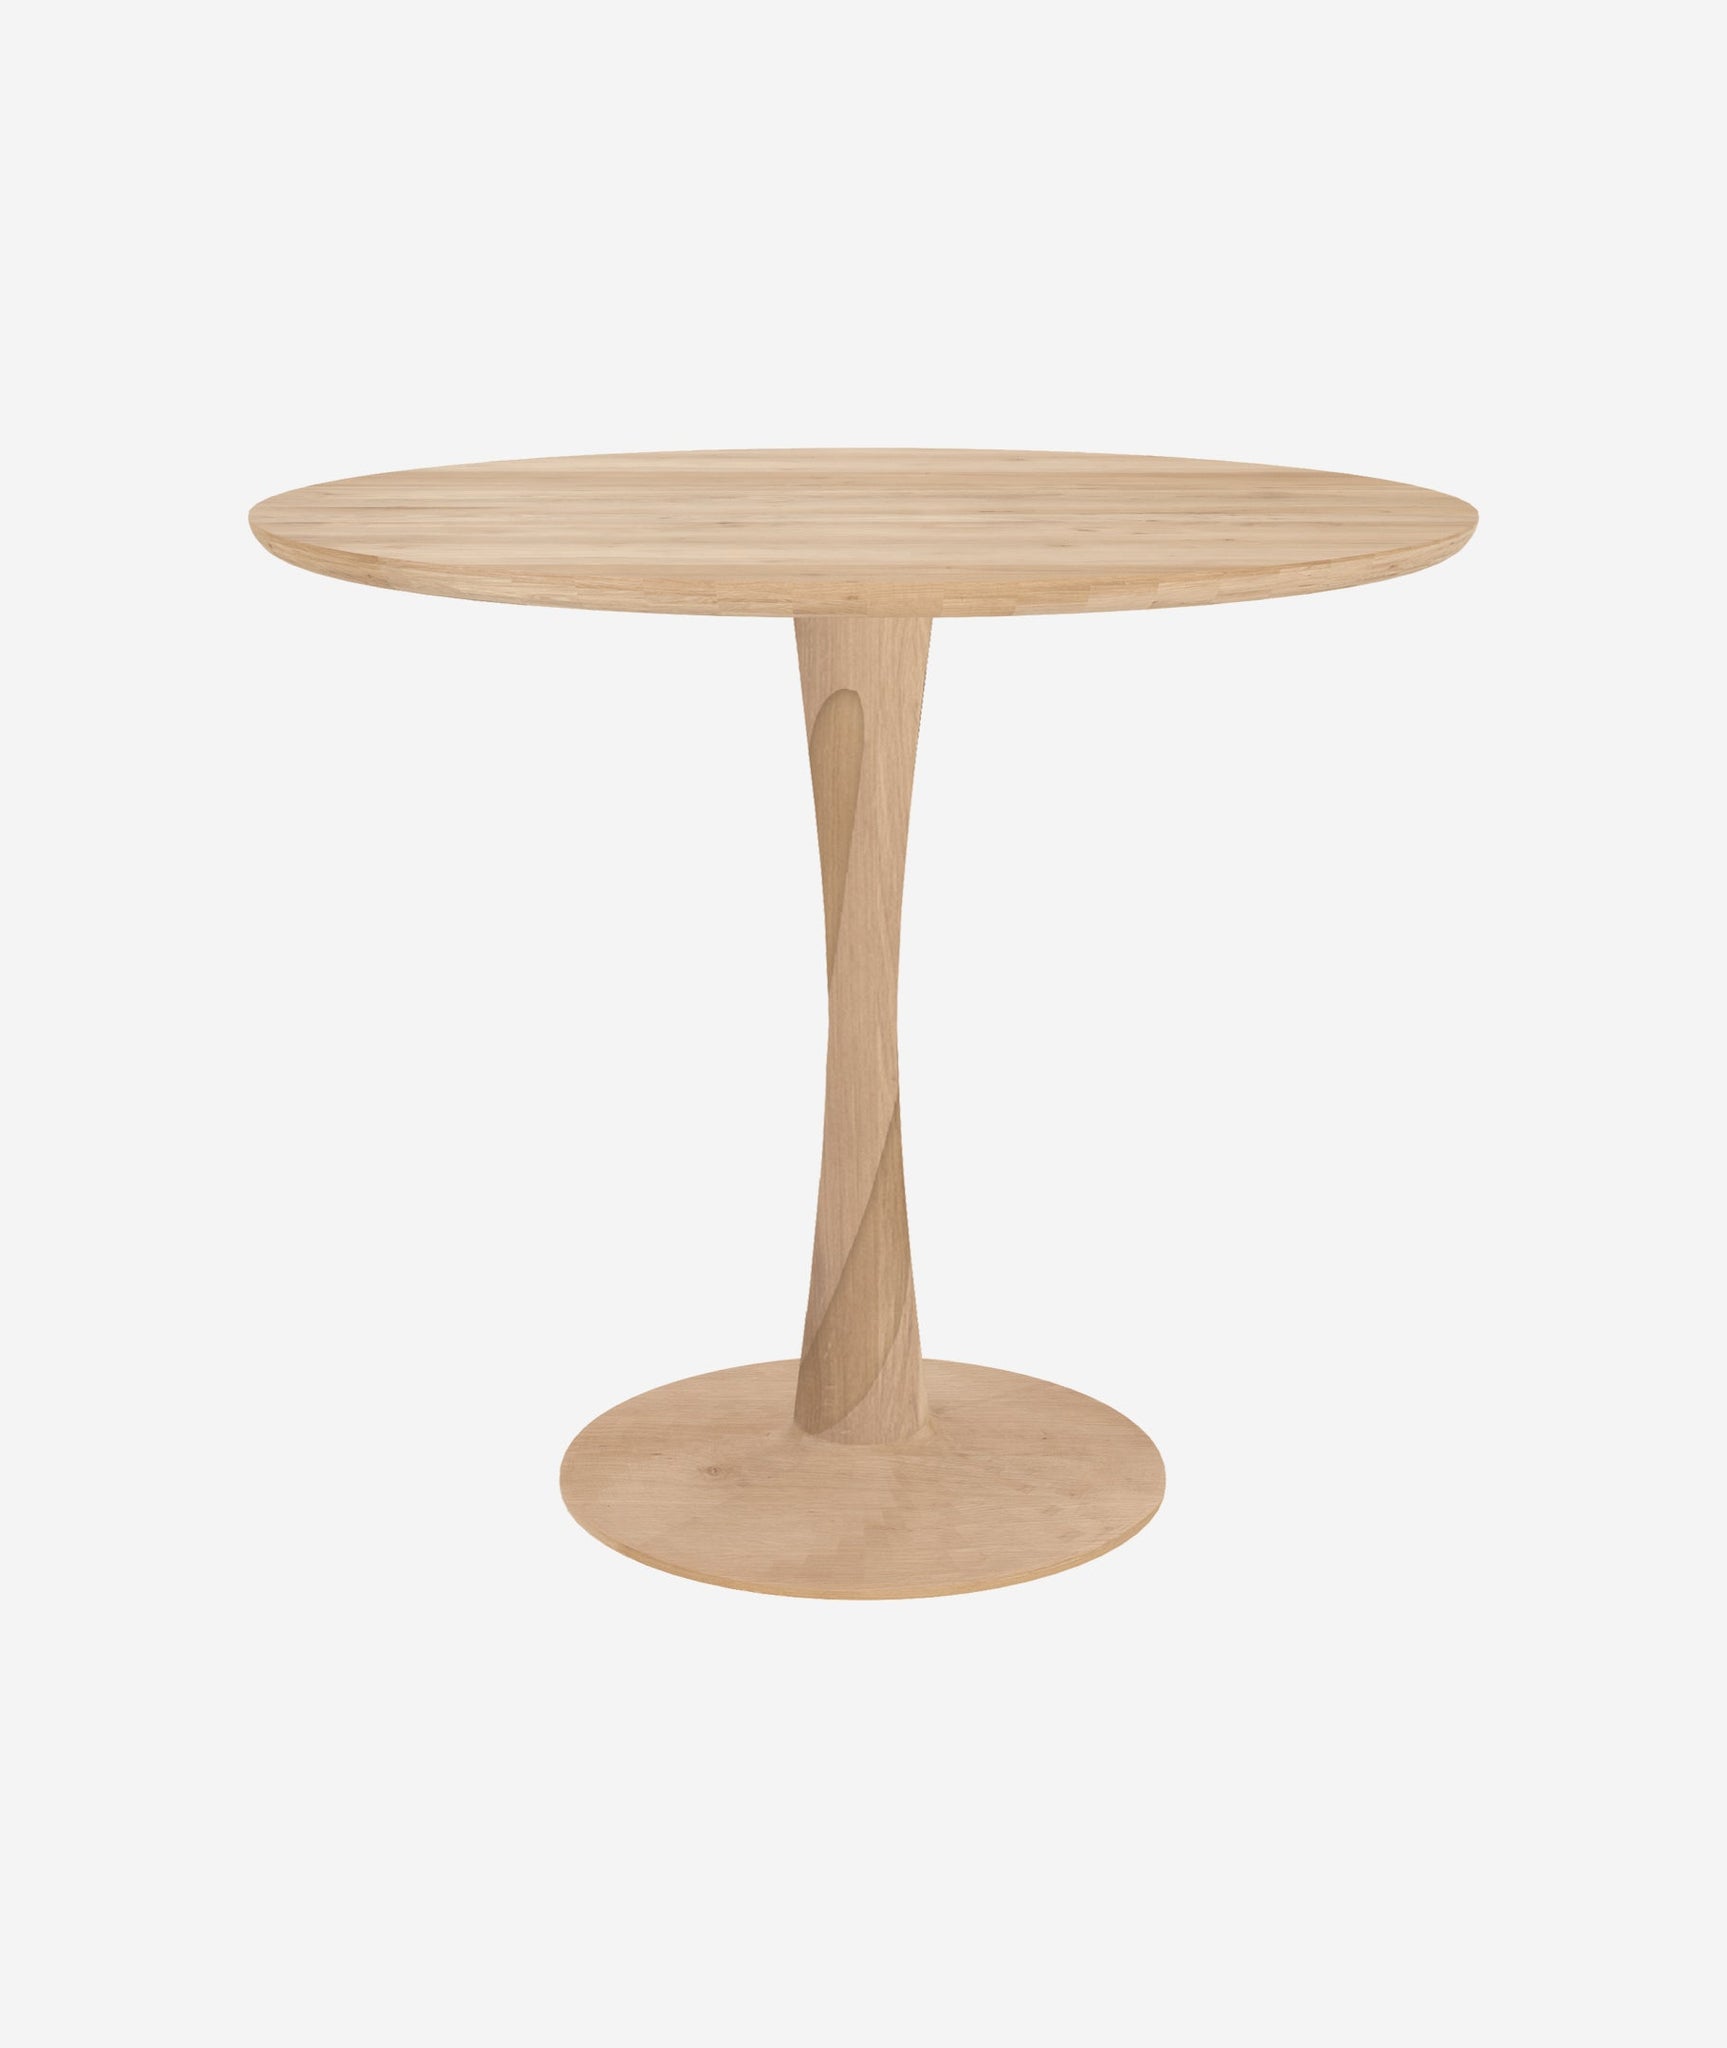 Torsion Dining Table Round - 2 Colors Ethnicraft - BEAM // Design Store